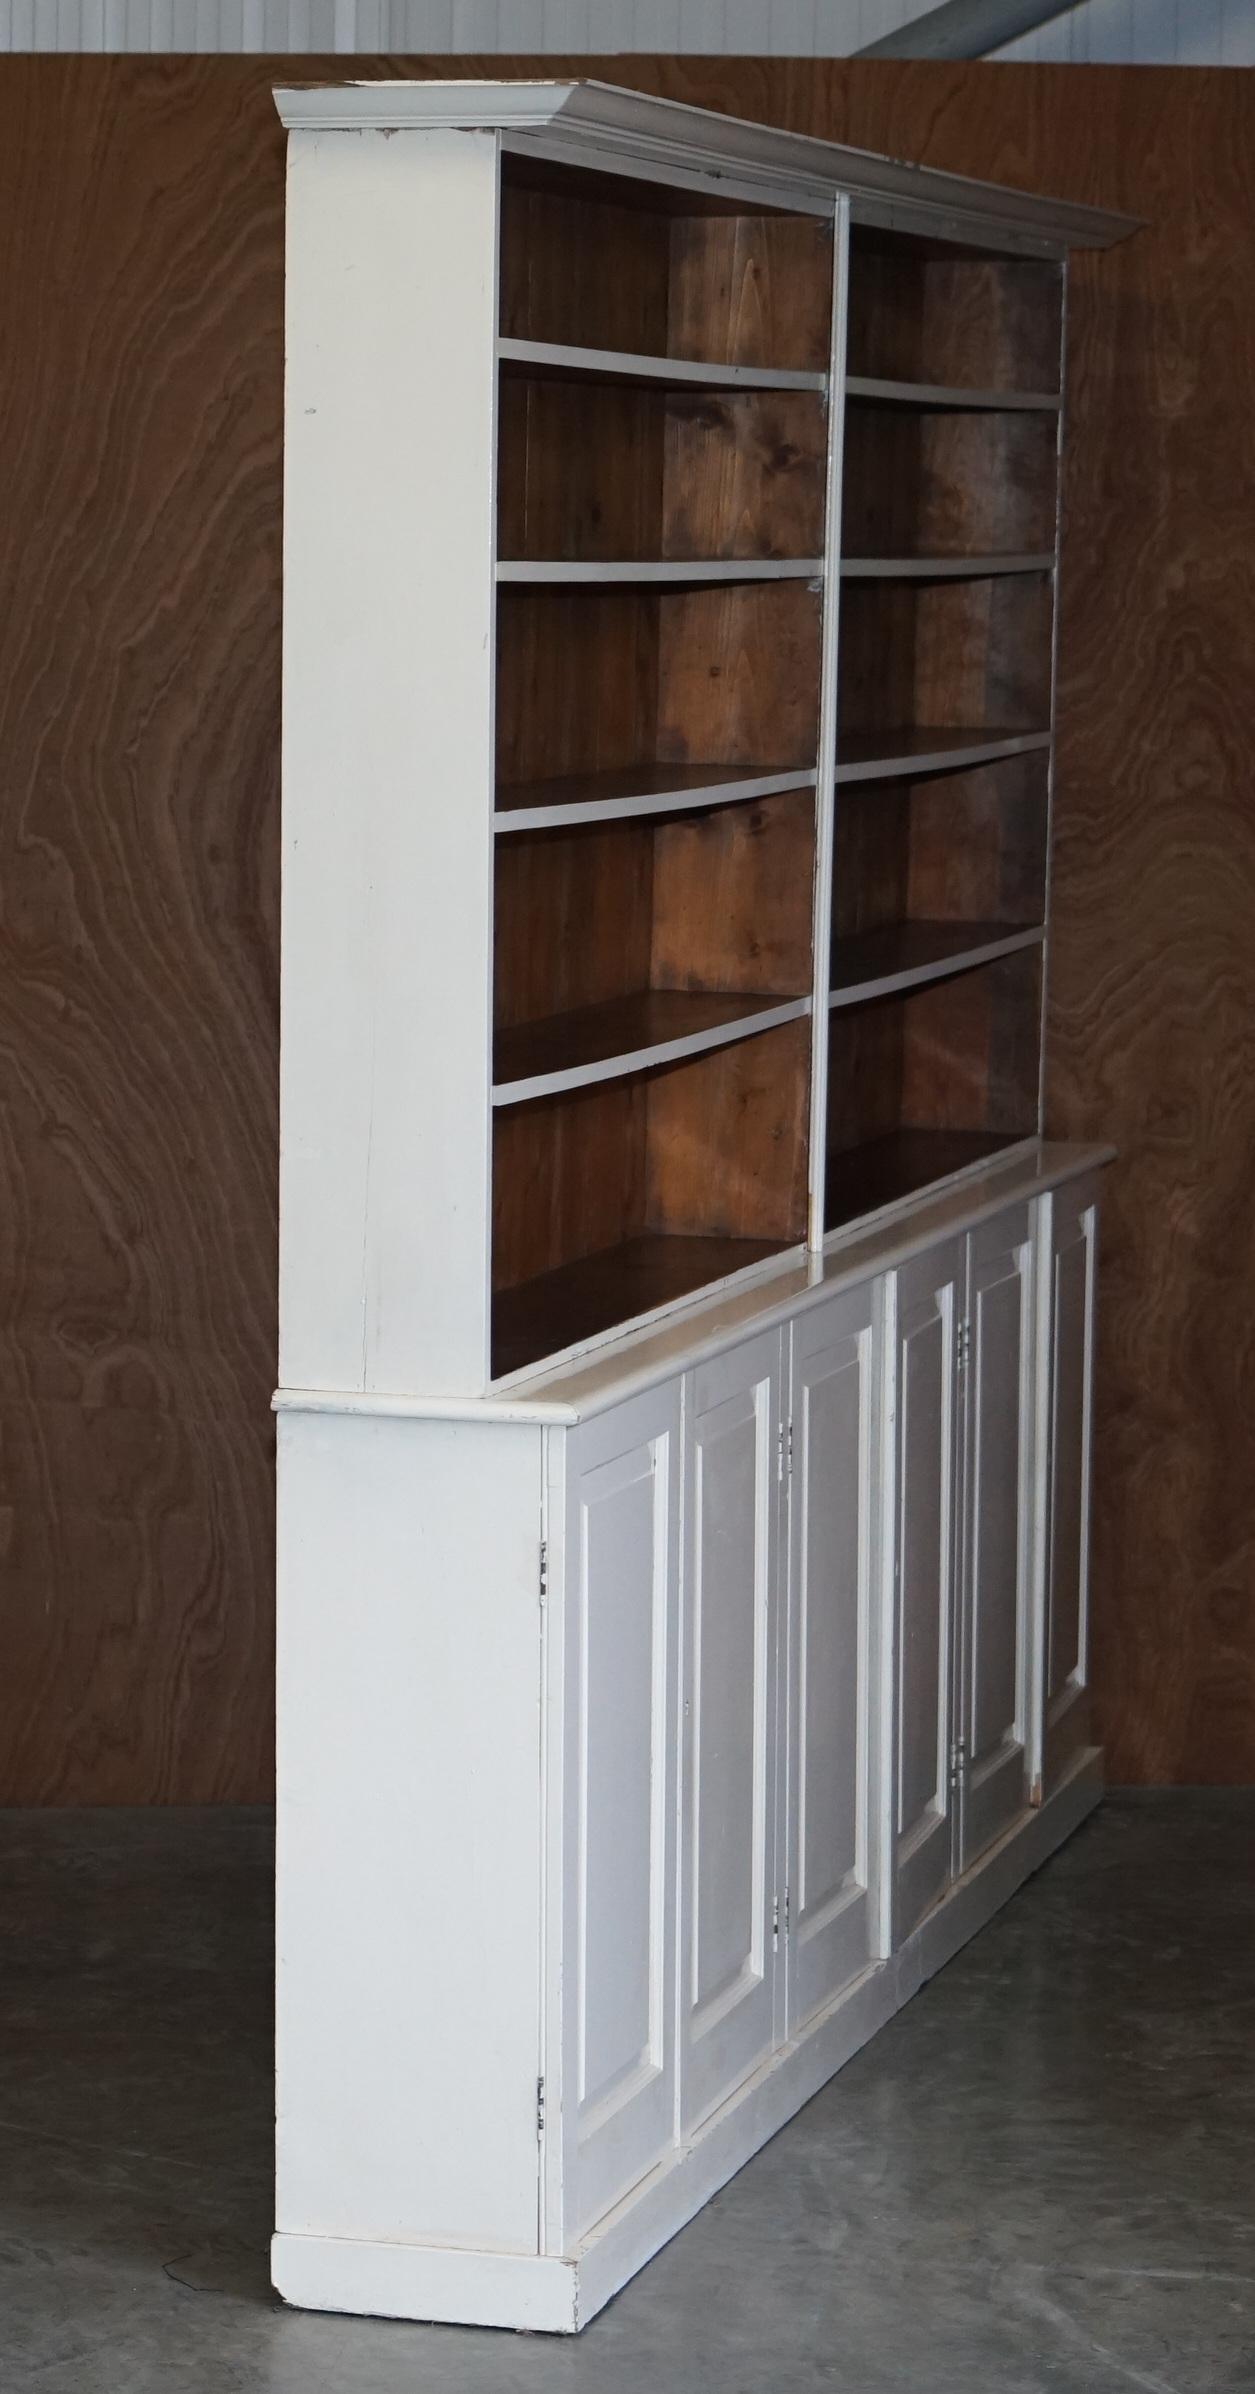 We are delighted to offer for sale this stunning original Victorian Pitch Pine library bookcase with vintage circa 1950's mid century painted finish 

A very good looking well made and decorative piece of English country furniture. It can be used